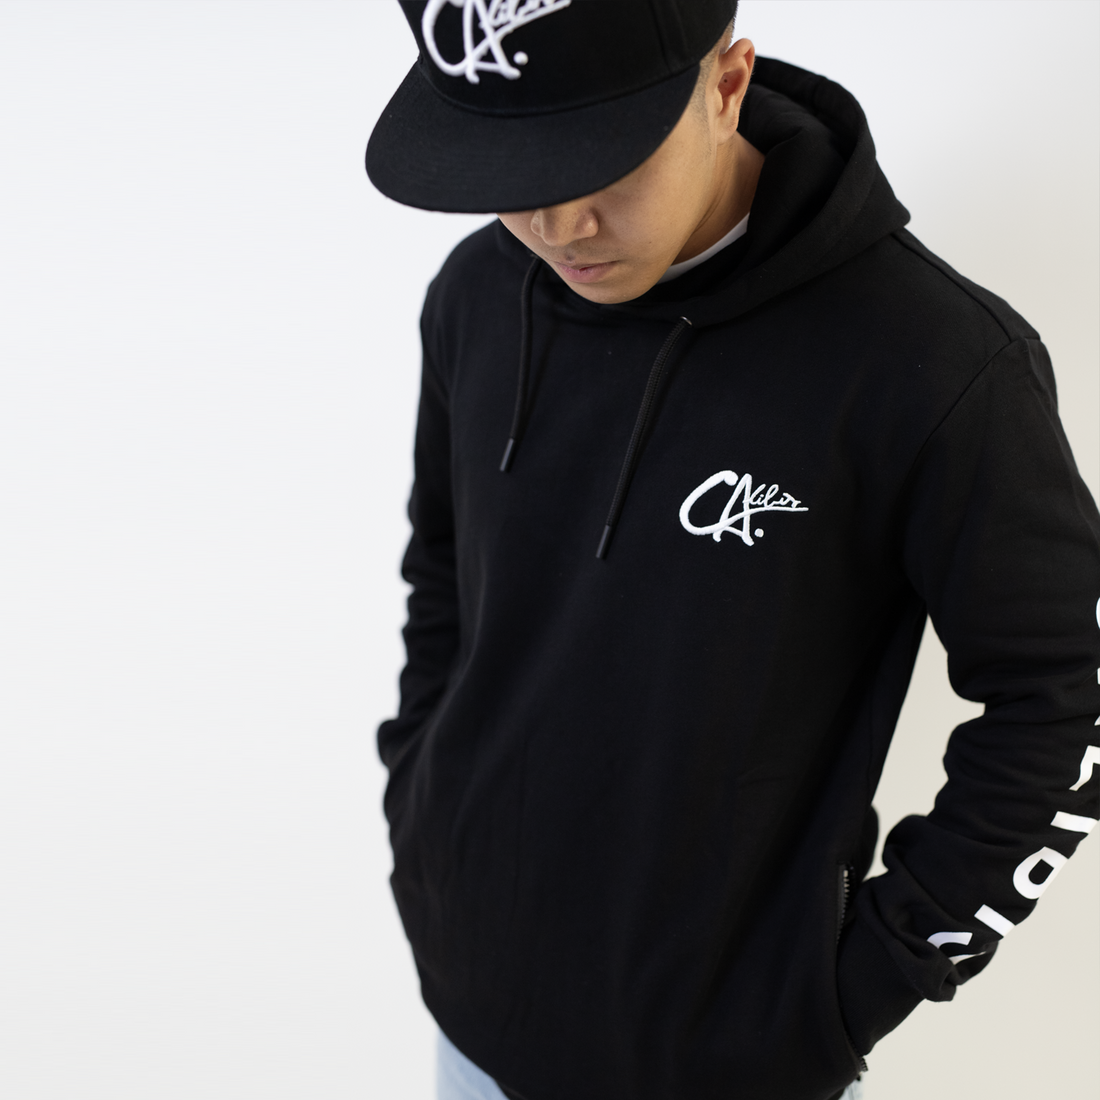 Founded Premium Hoodie